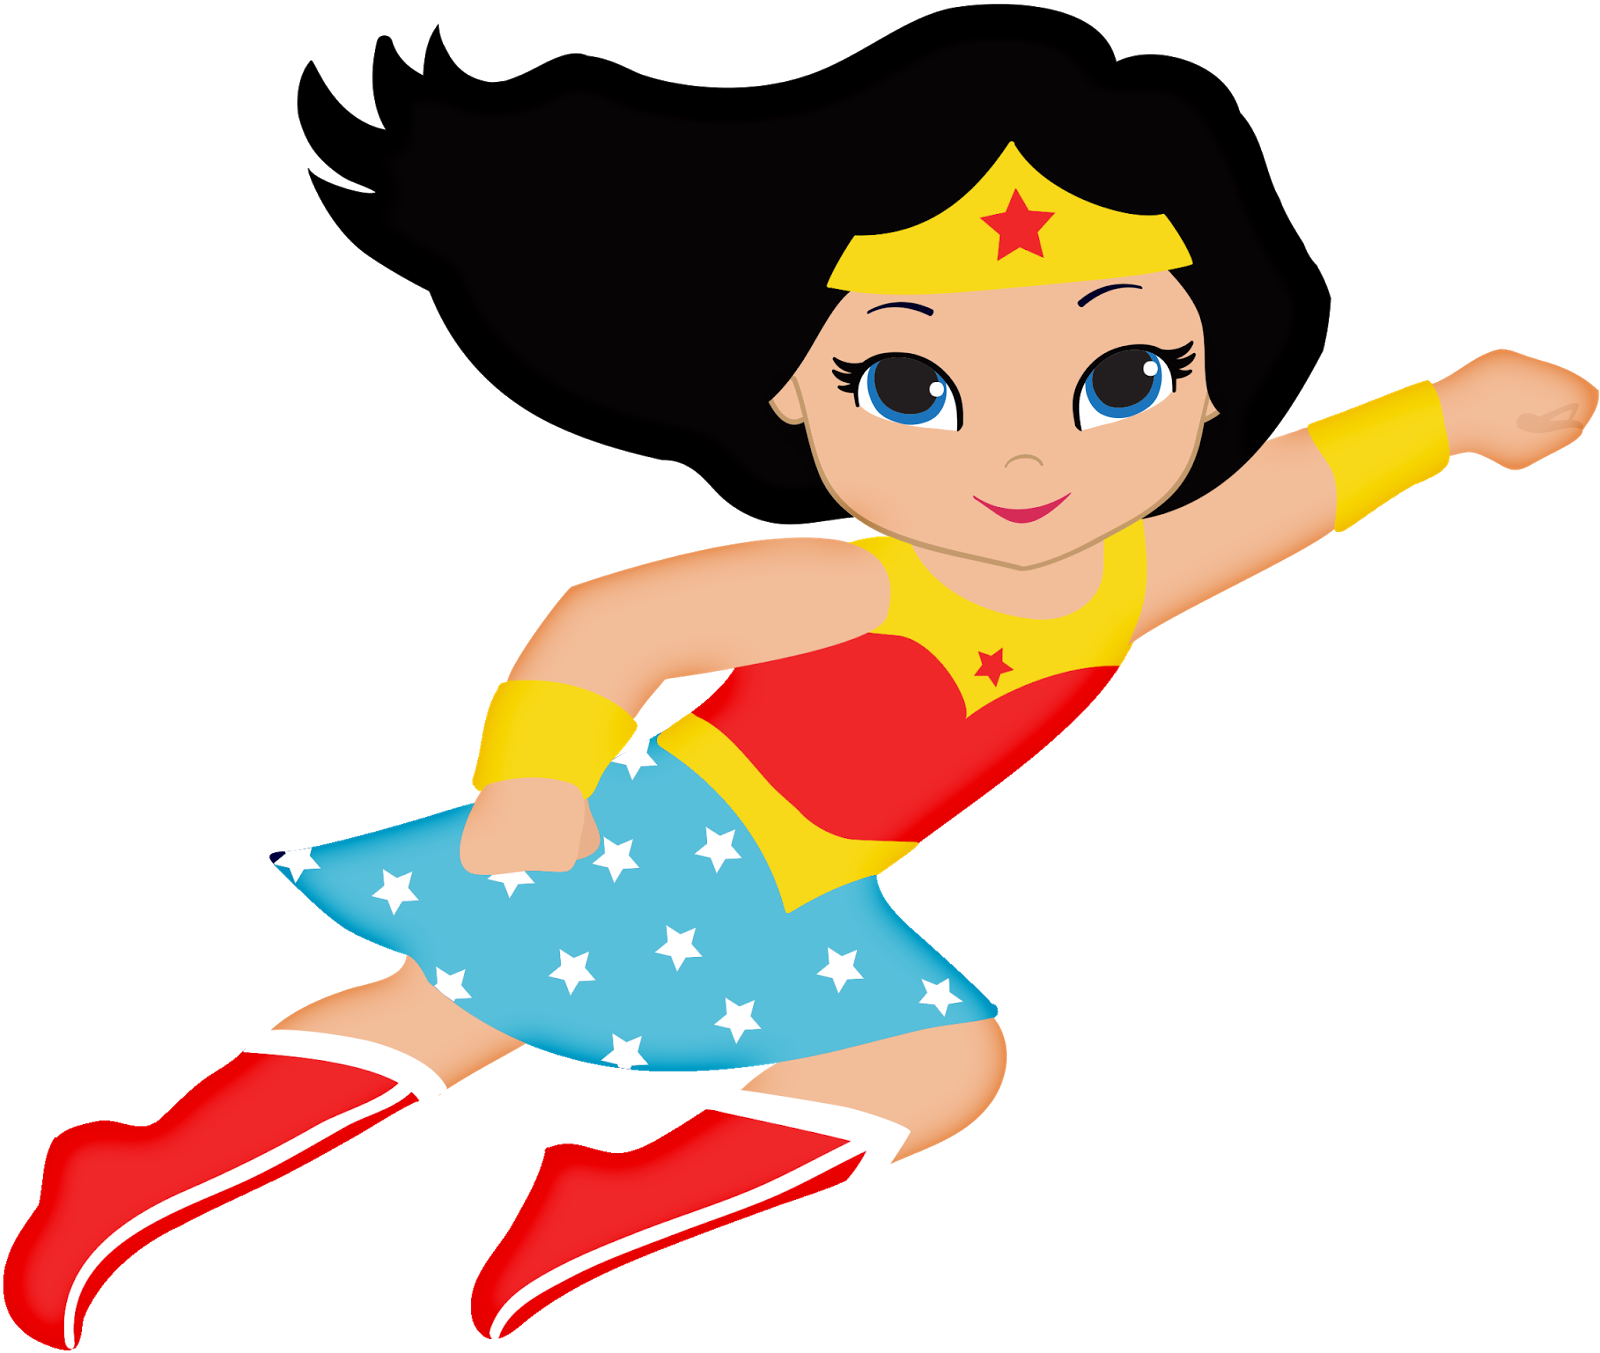 Female clipart angry. Wonder woman baby oh